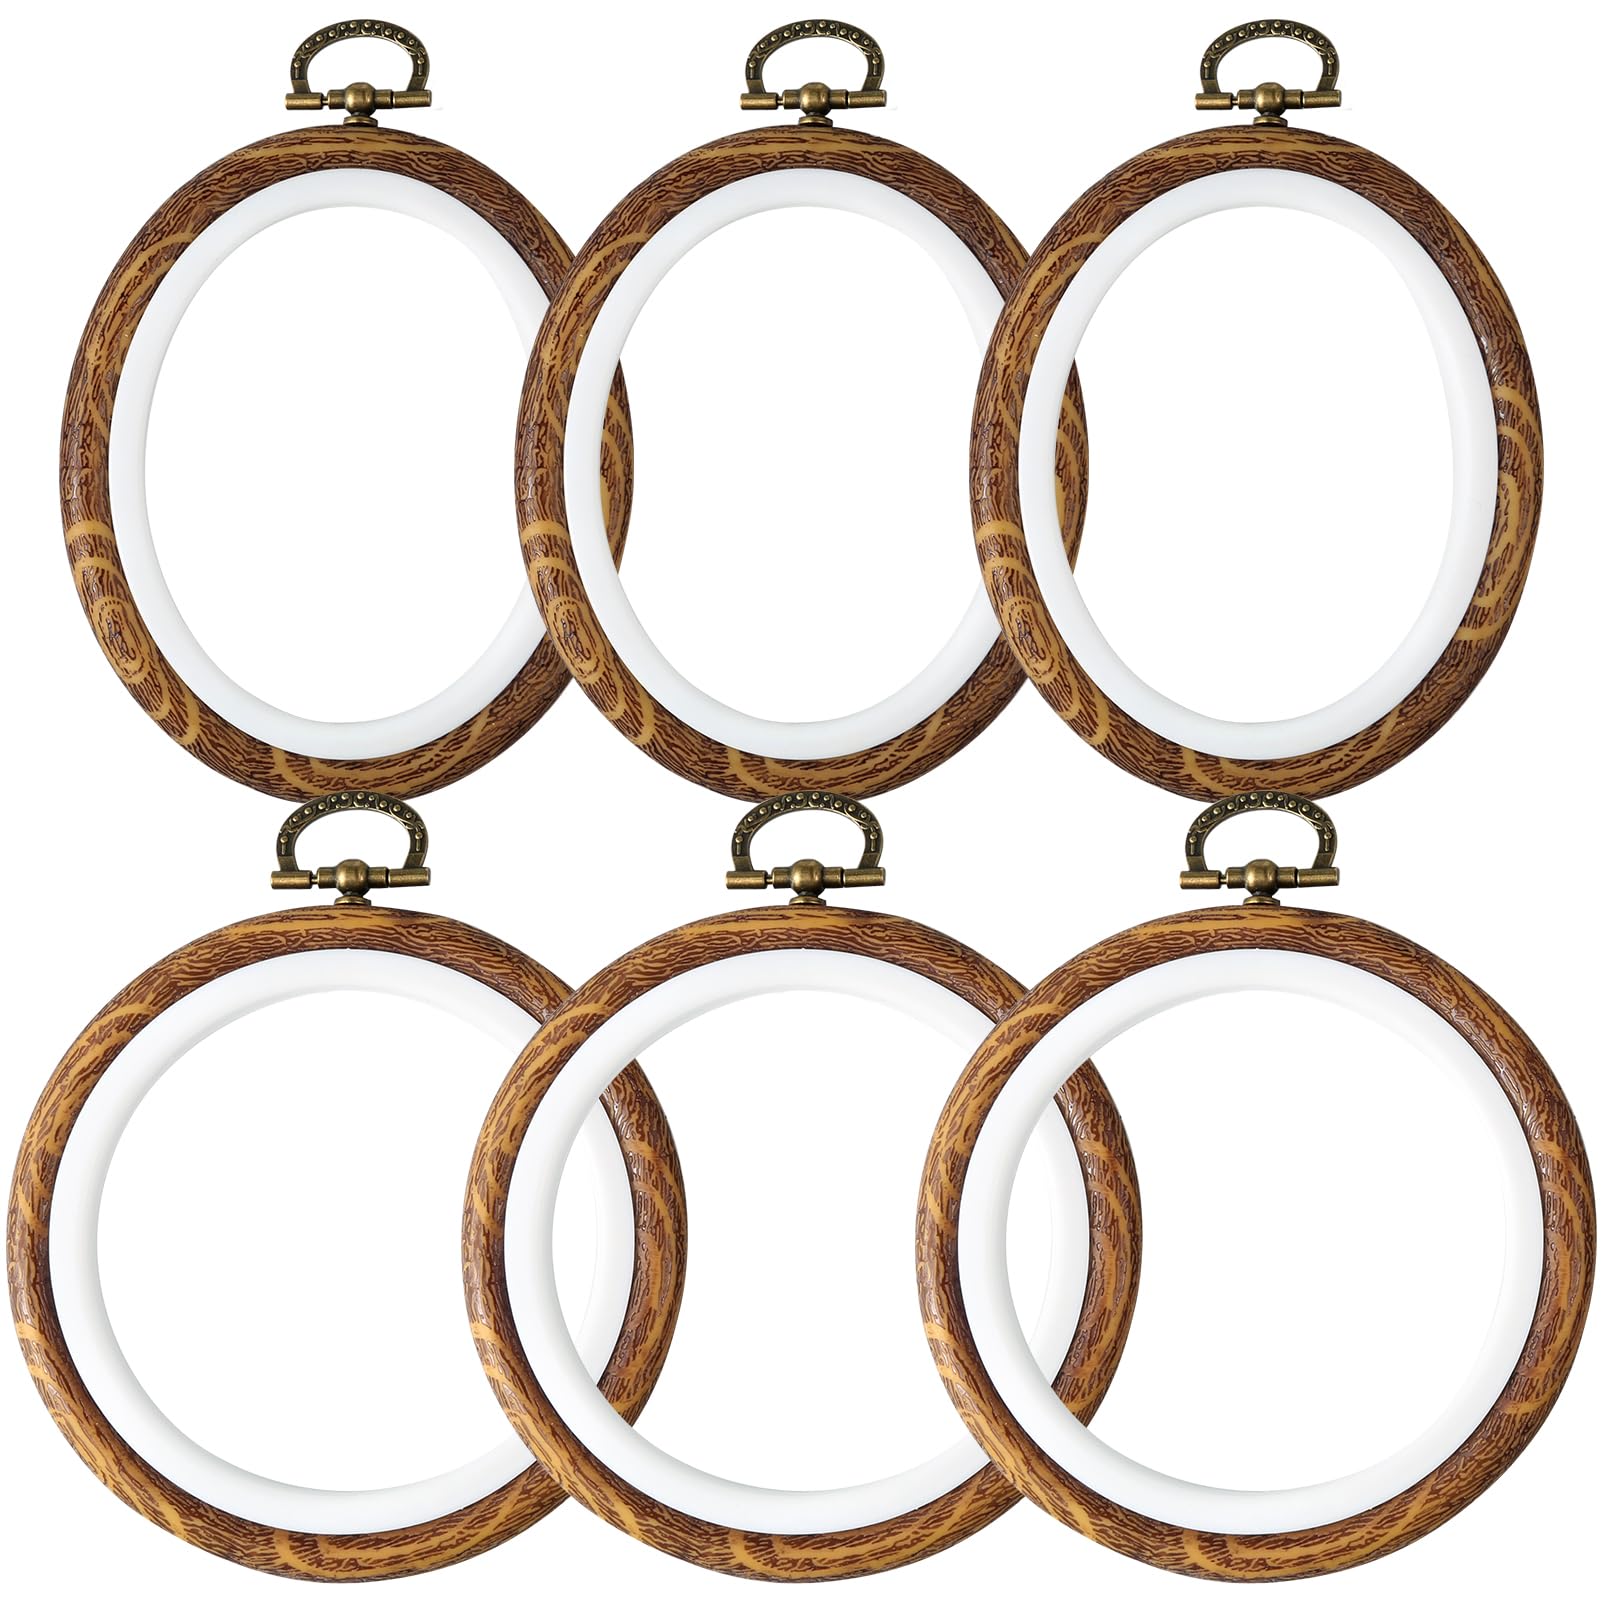  4inch Embroidery Hoop Frames for Display - Oval Small Cross  Stitch Hoops Set, 6 Pieces Resin Imitated Wood Hoop Hanging Frame Circle  for Craft Decoration